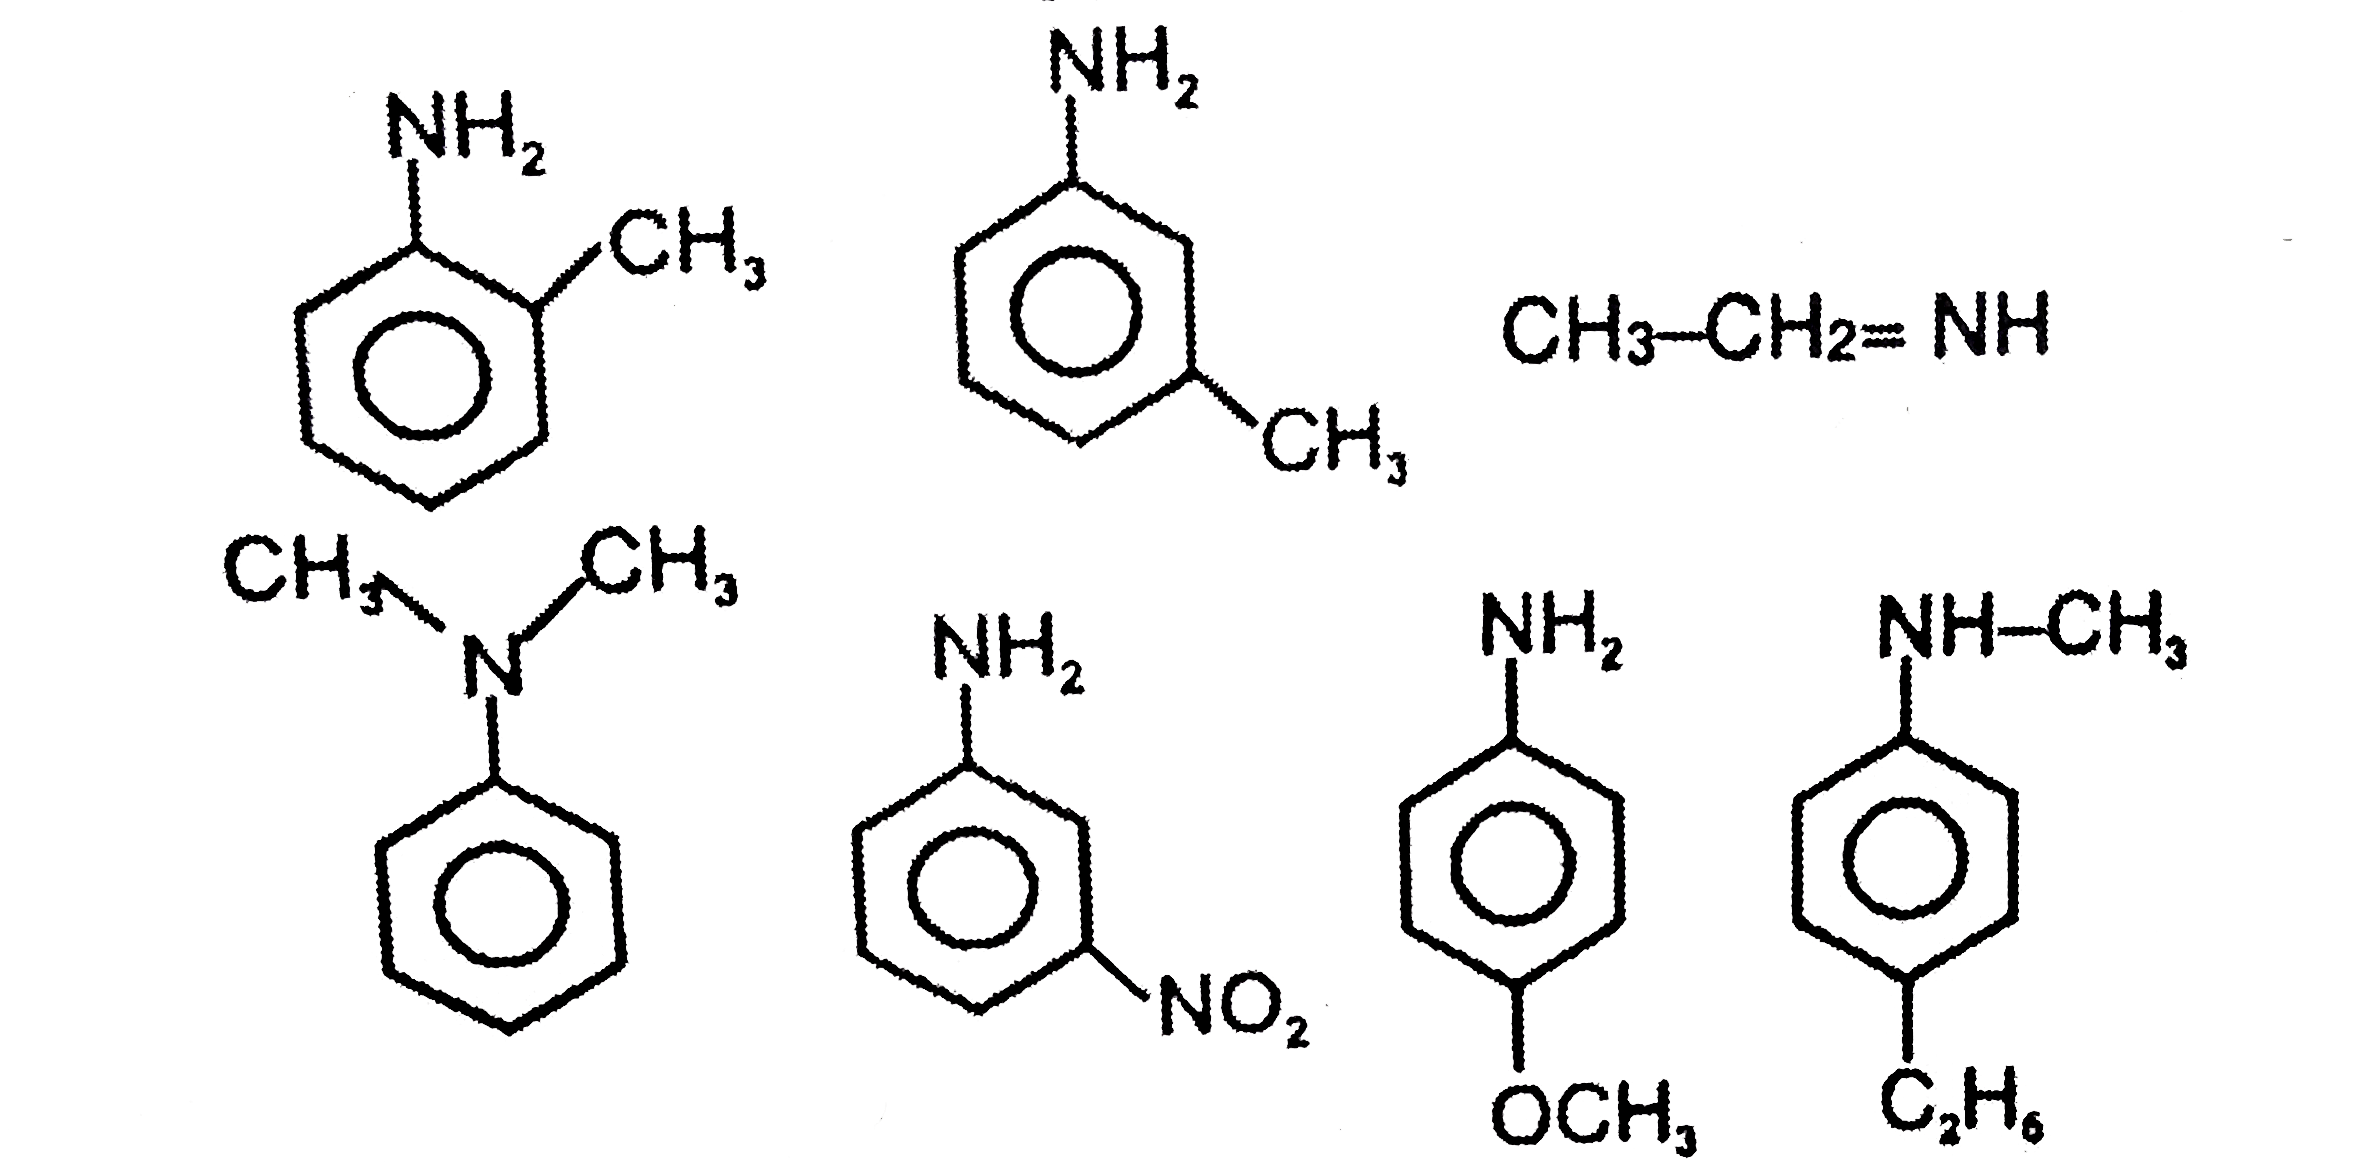 How many following compounds are more basic than aniline.